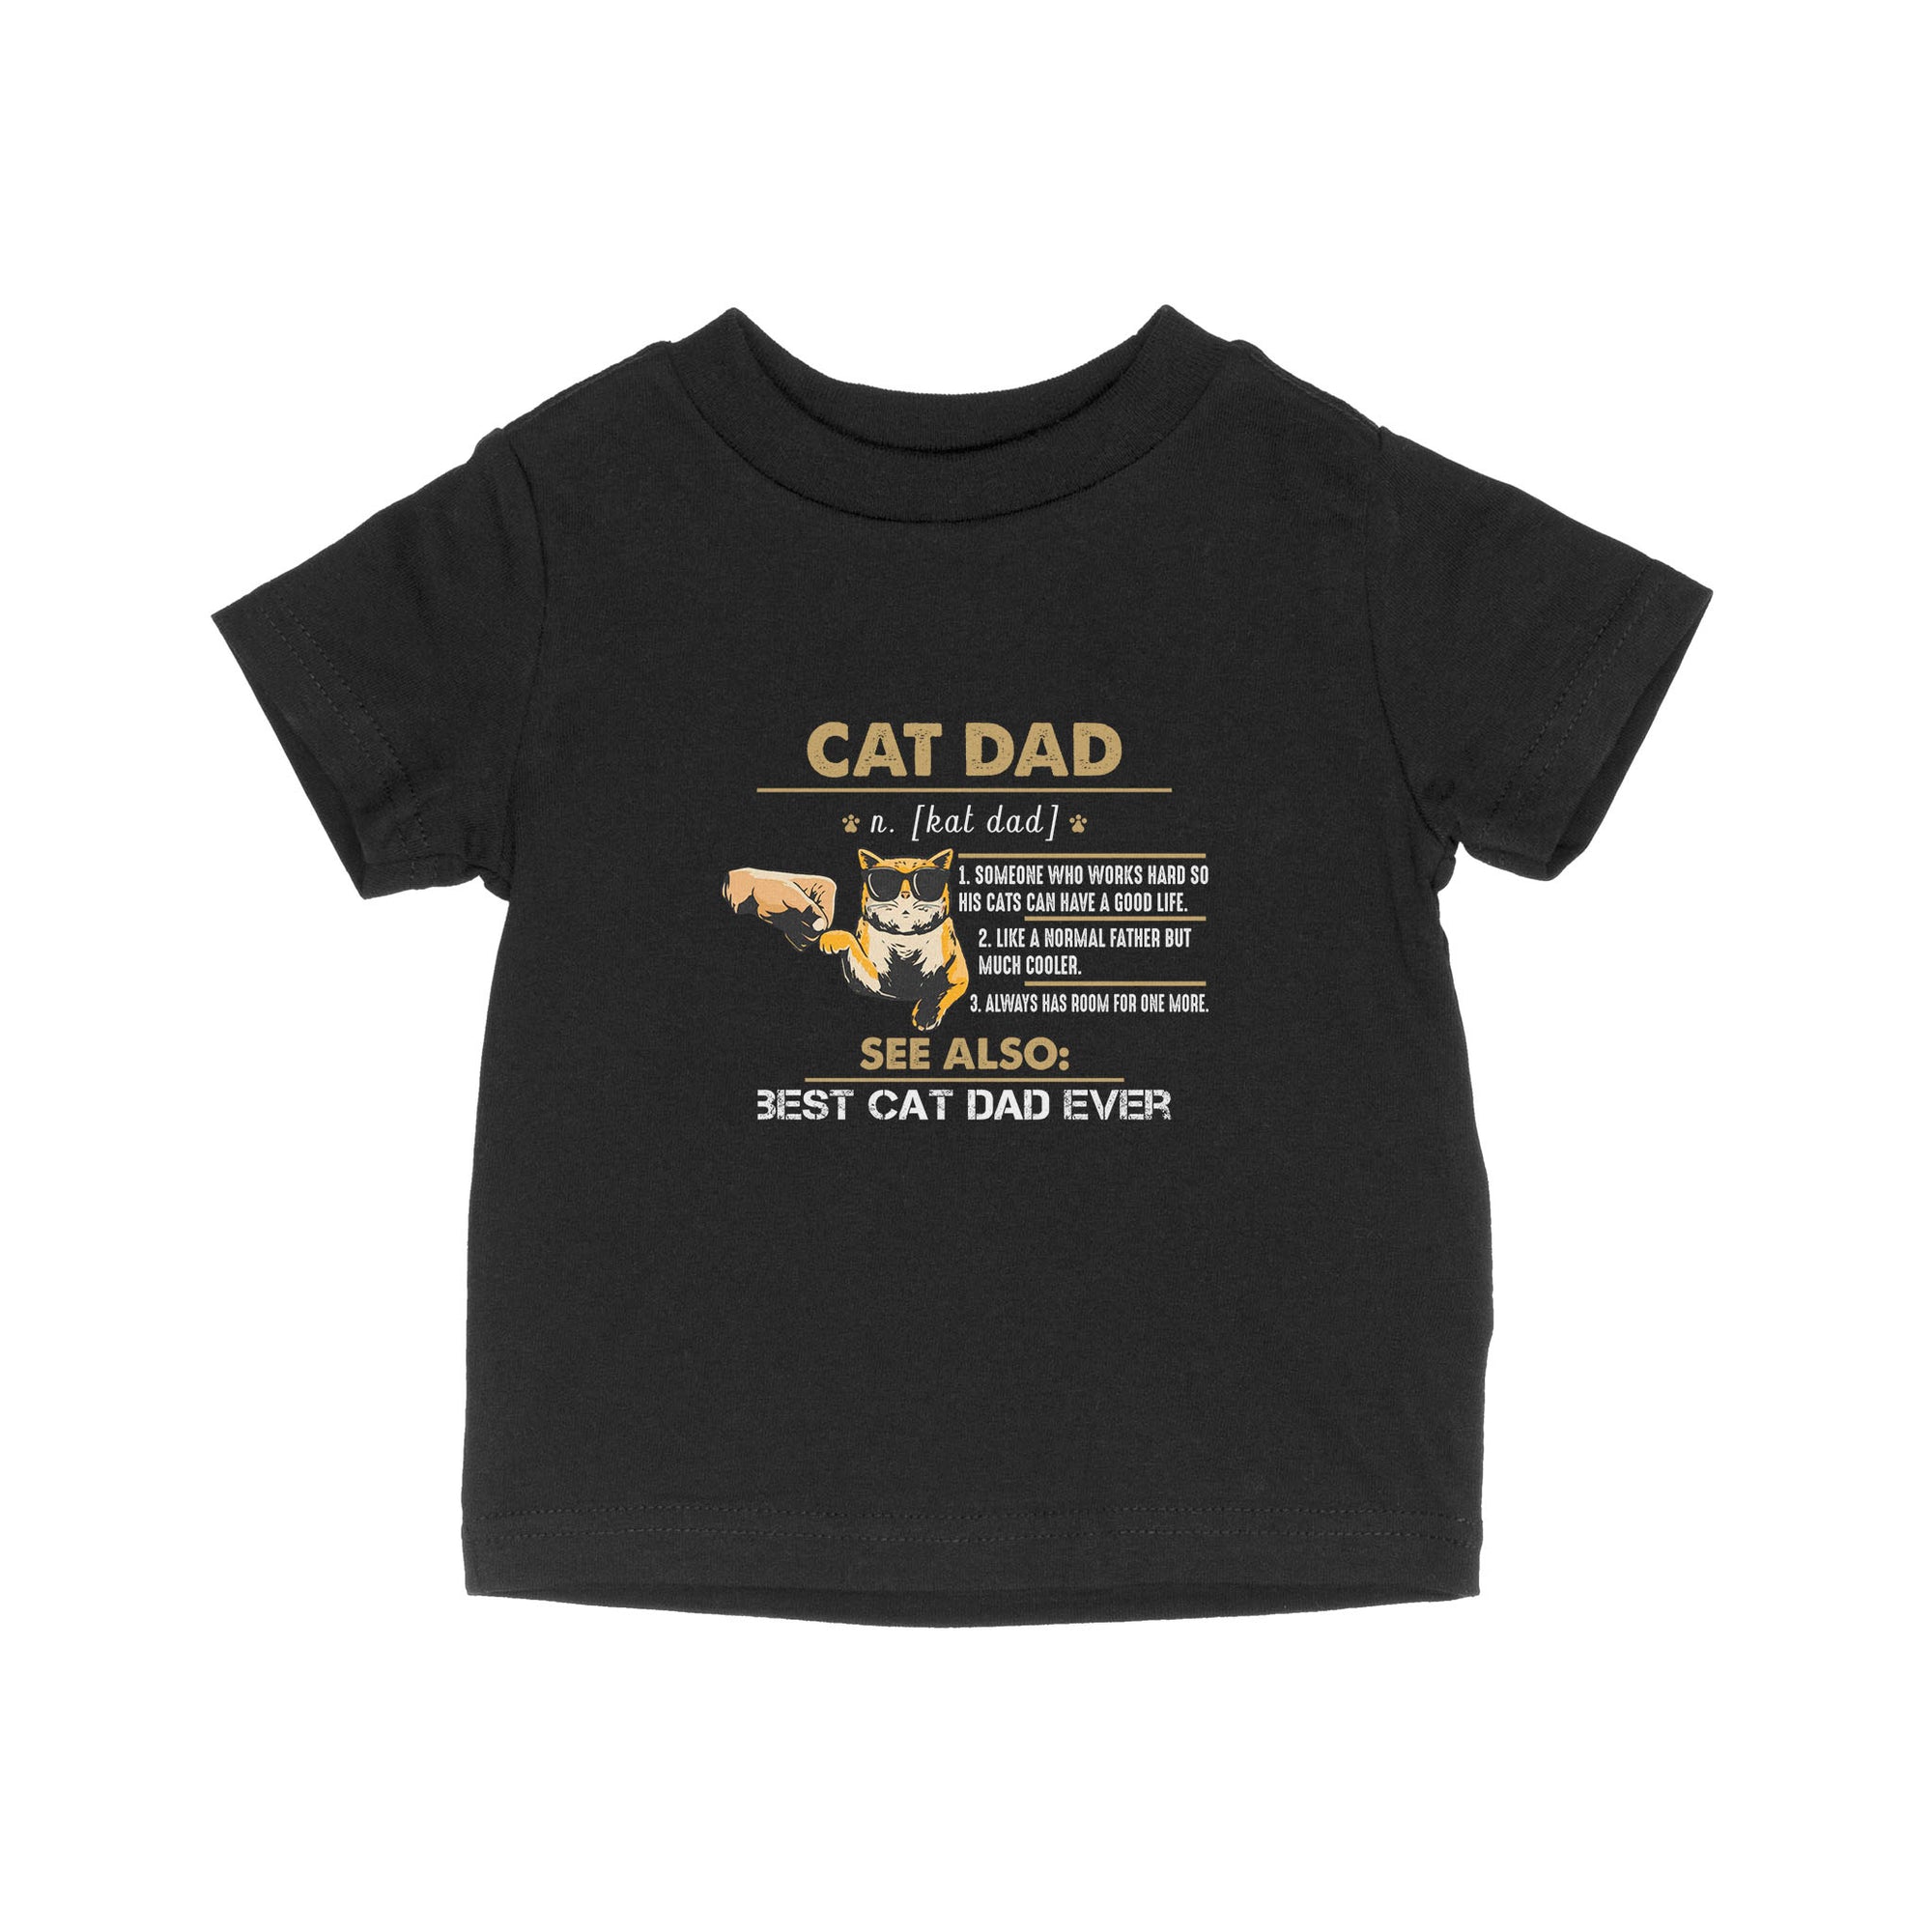 Cat Lover Cat Dad Someone Who Works Hard So His Cats Can Have A Good Life Like A Normal Father But Much Cooler - Baby T-Shirt